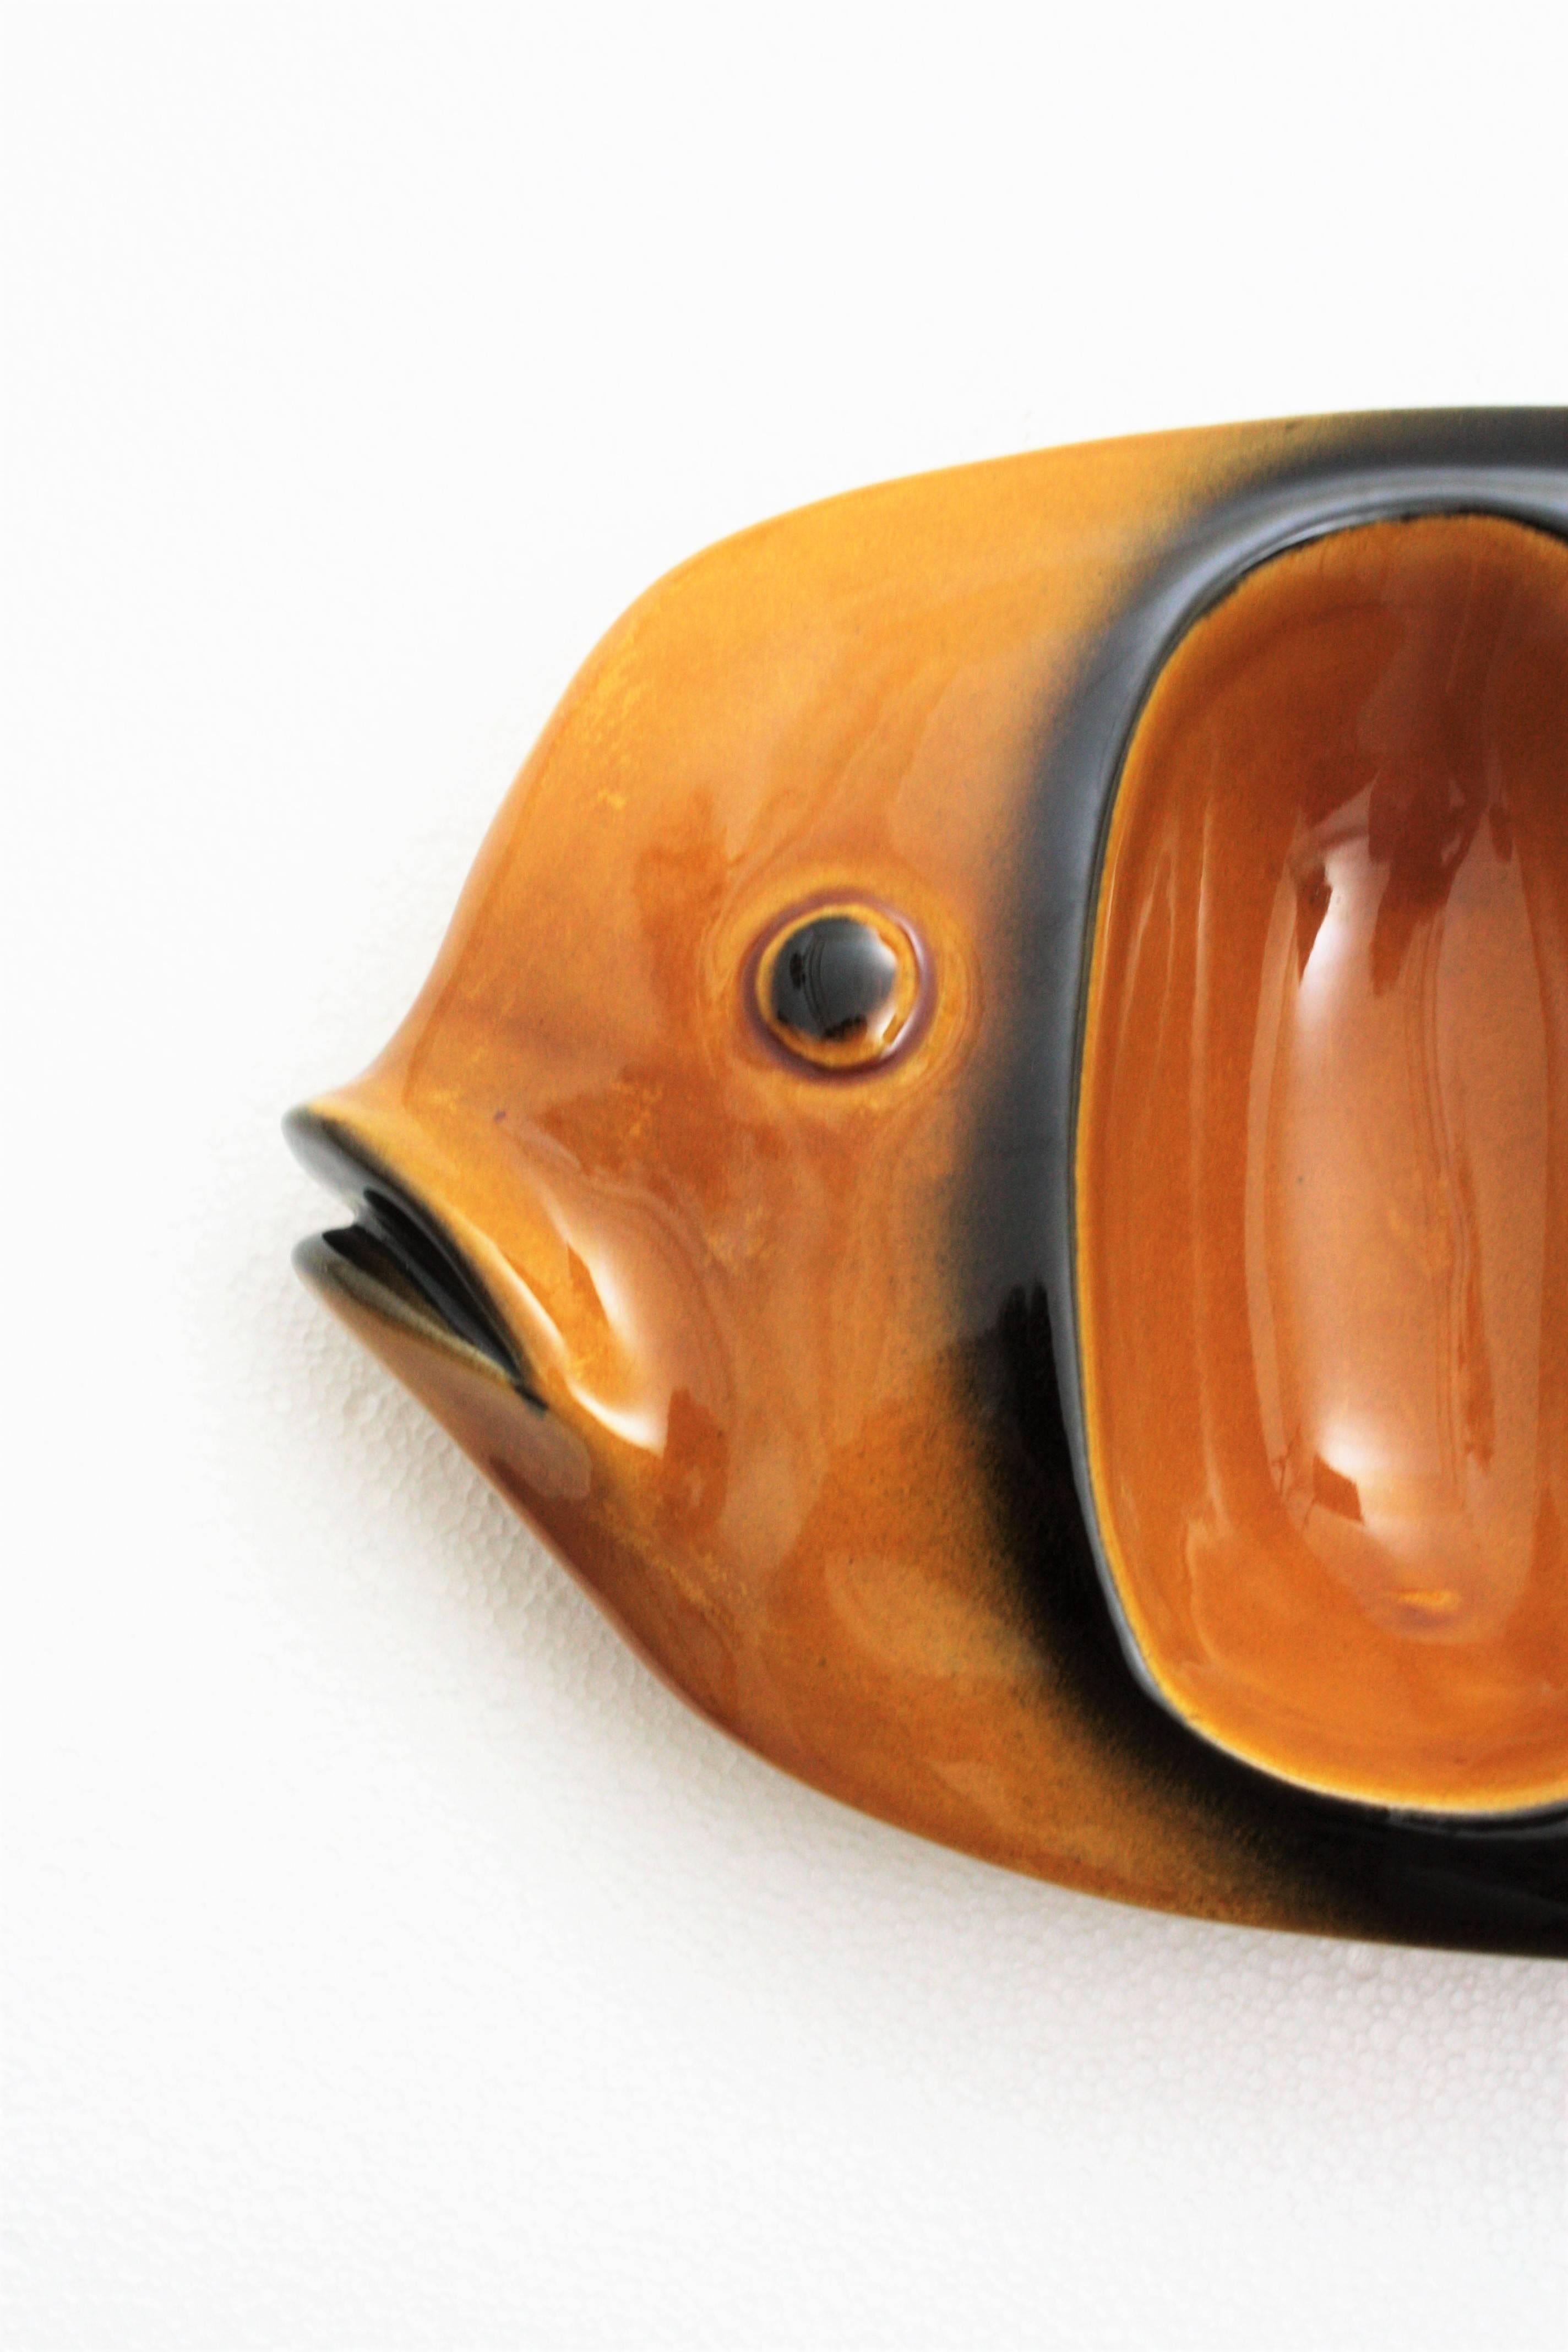 Large Glazed Ceramic Amber and Black Fish Platter / Wall Plate, Spain, 1950s
The perfect serving piece for entertainment or party with four compartments.
It can be hang on the wall with more ceramic fish plates or platters to create a cool wall